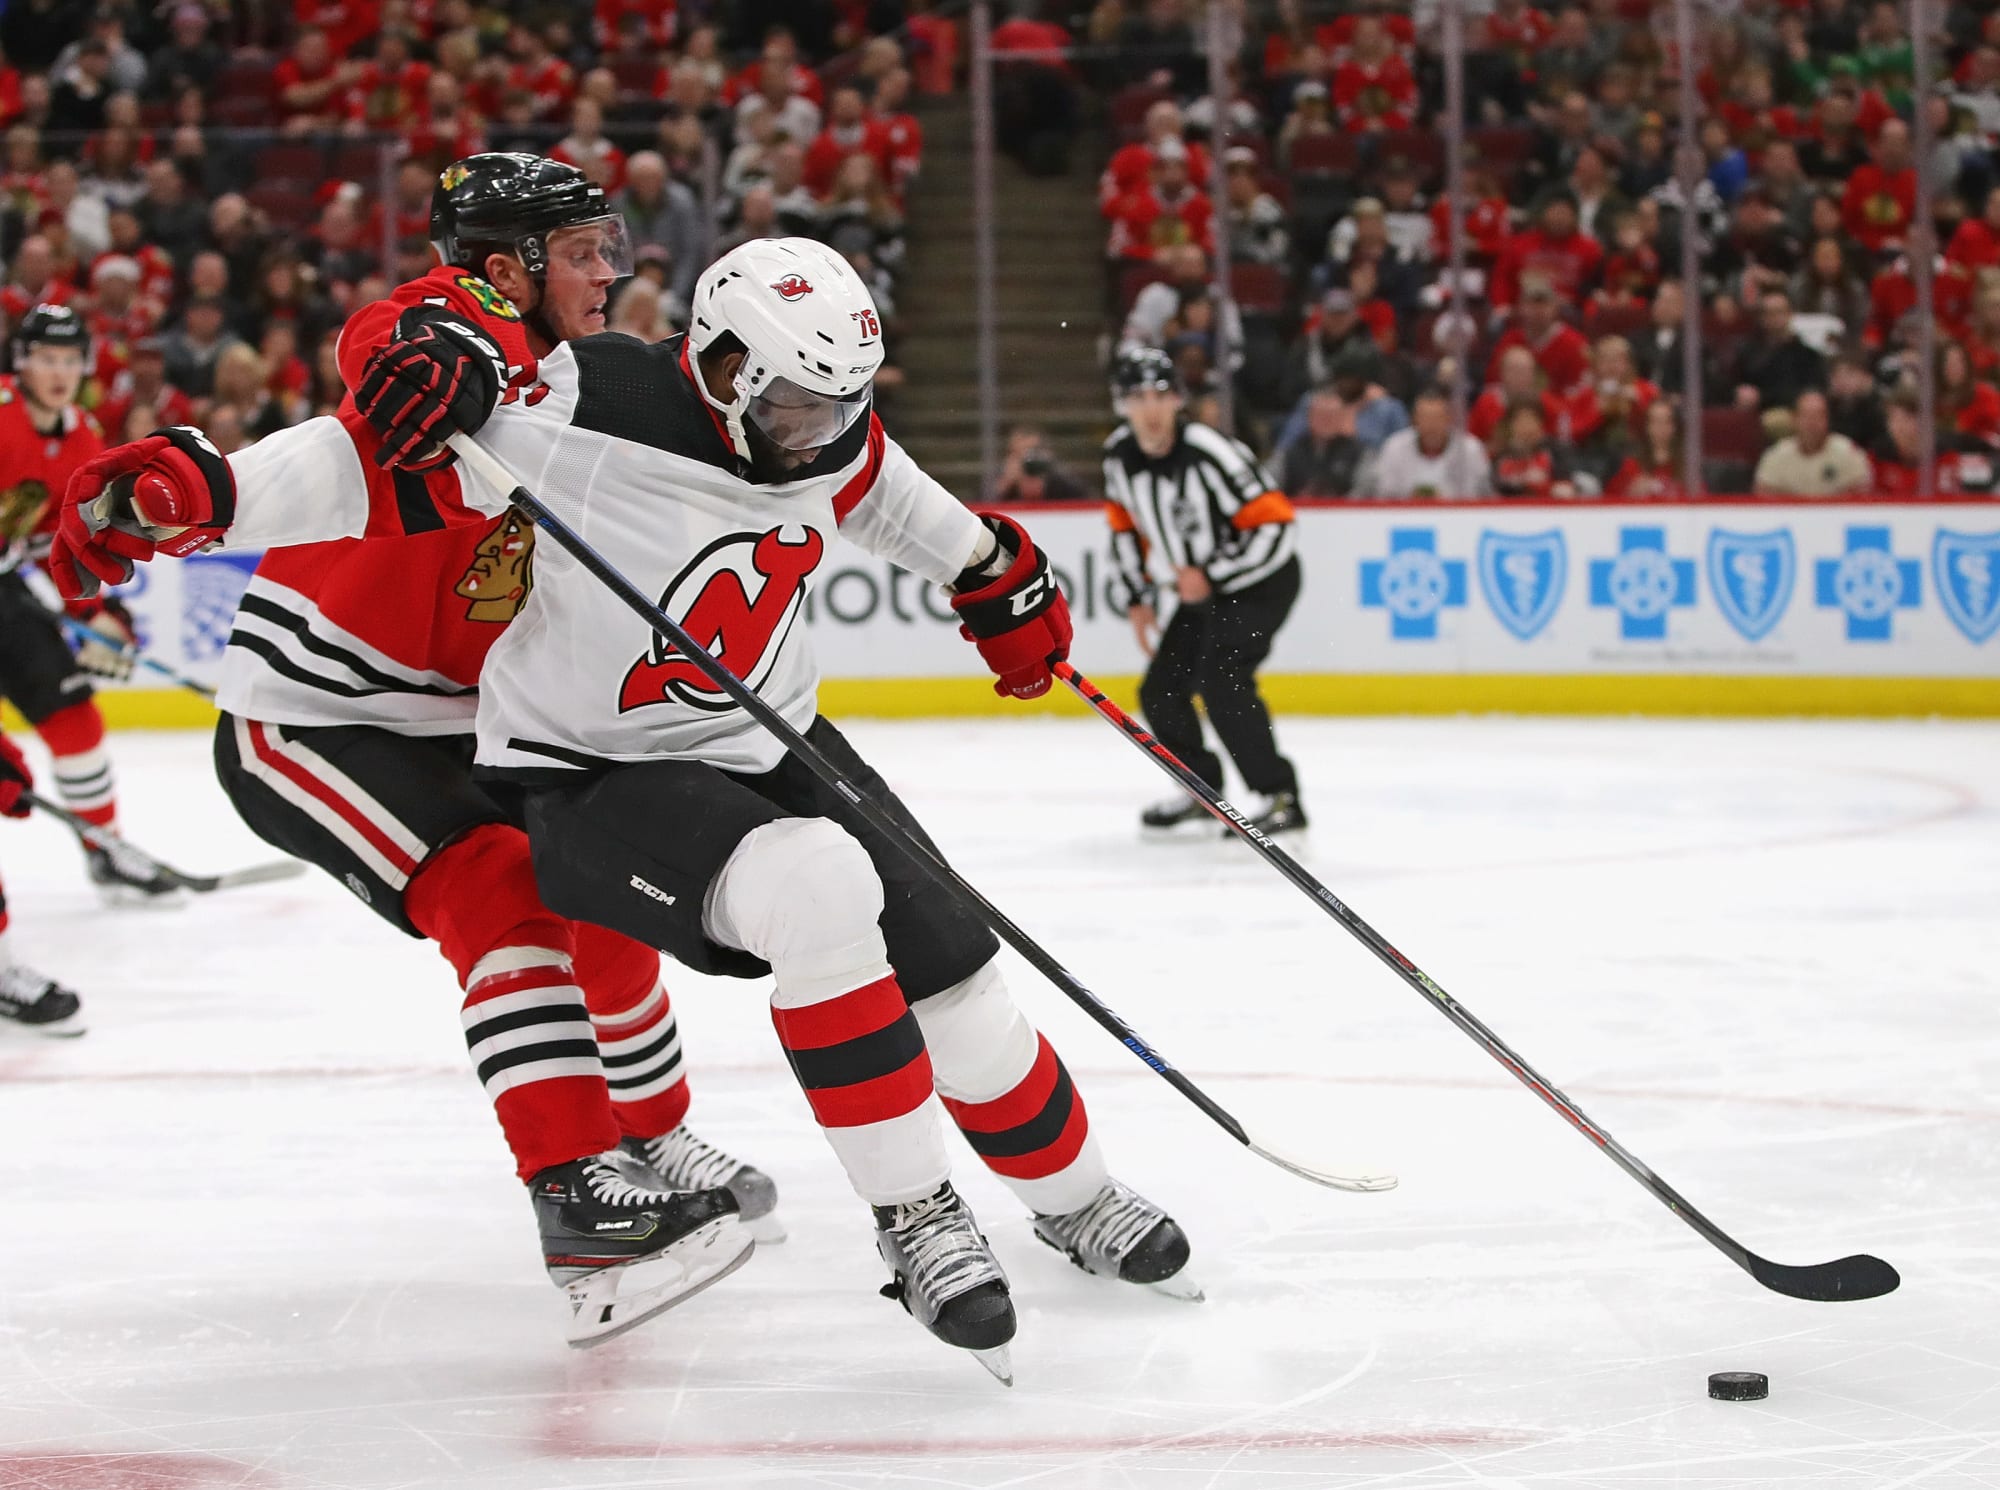 How New Jersey Devils Star P.K. Subban Trains to Dominate the NHL - Men's  Journal